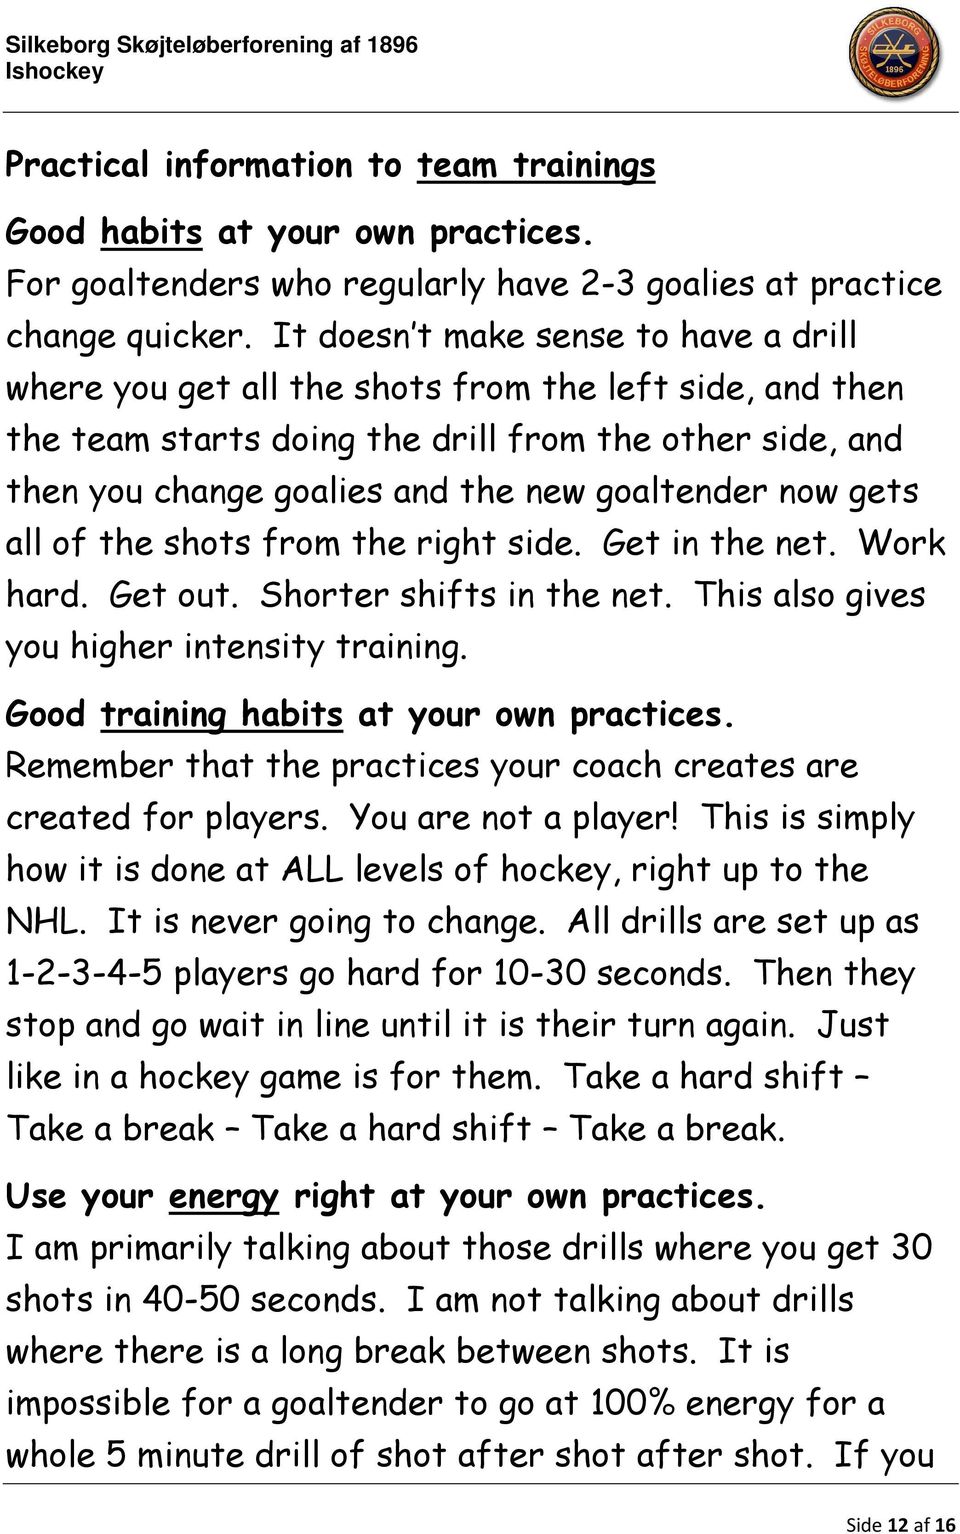 now gets all of the shots from the right side. Get in the net. Work hard. Get out. Shorter shifts in the net. This also gives you higher intensity training. Good training habits at your own practices.